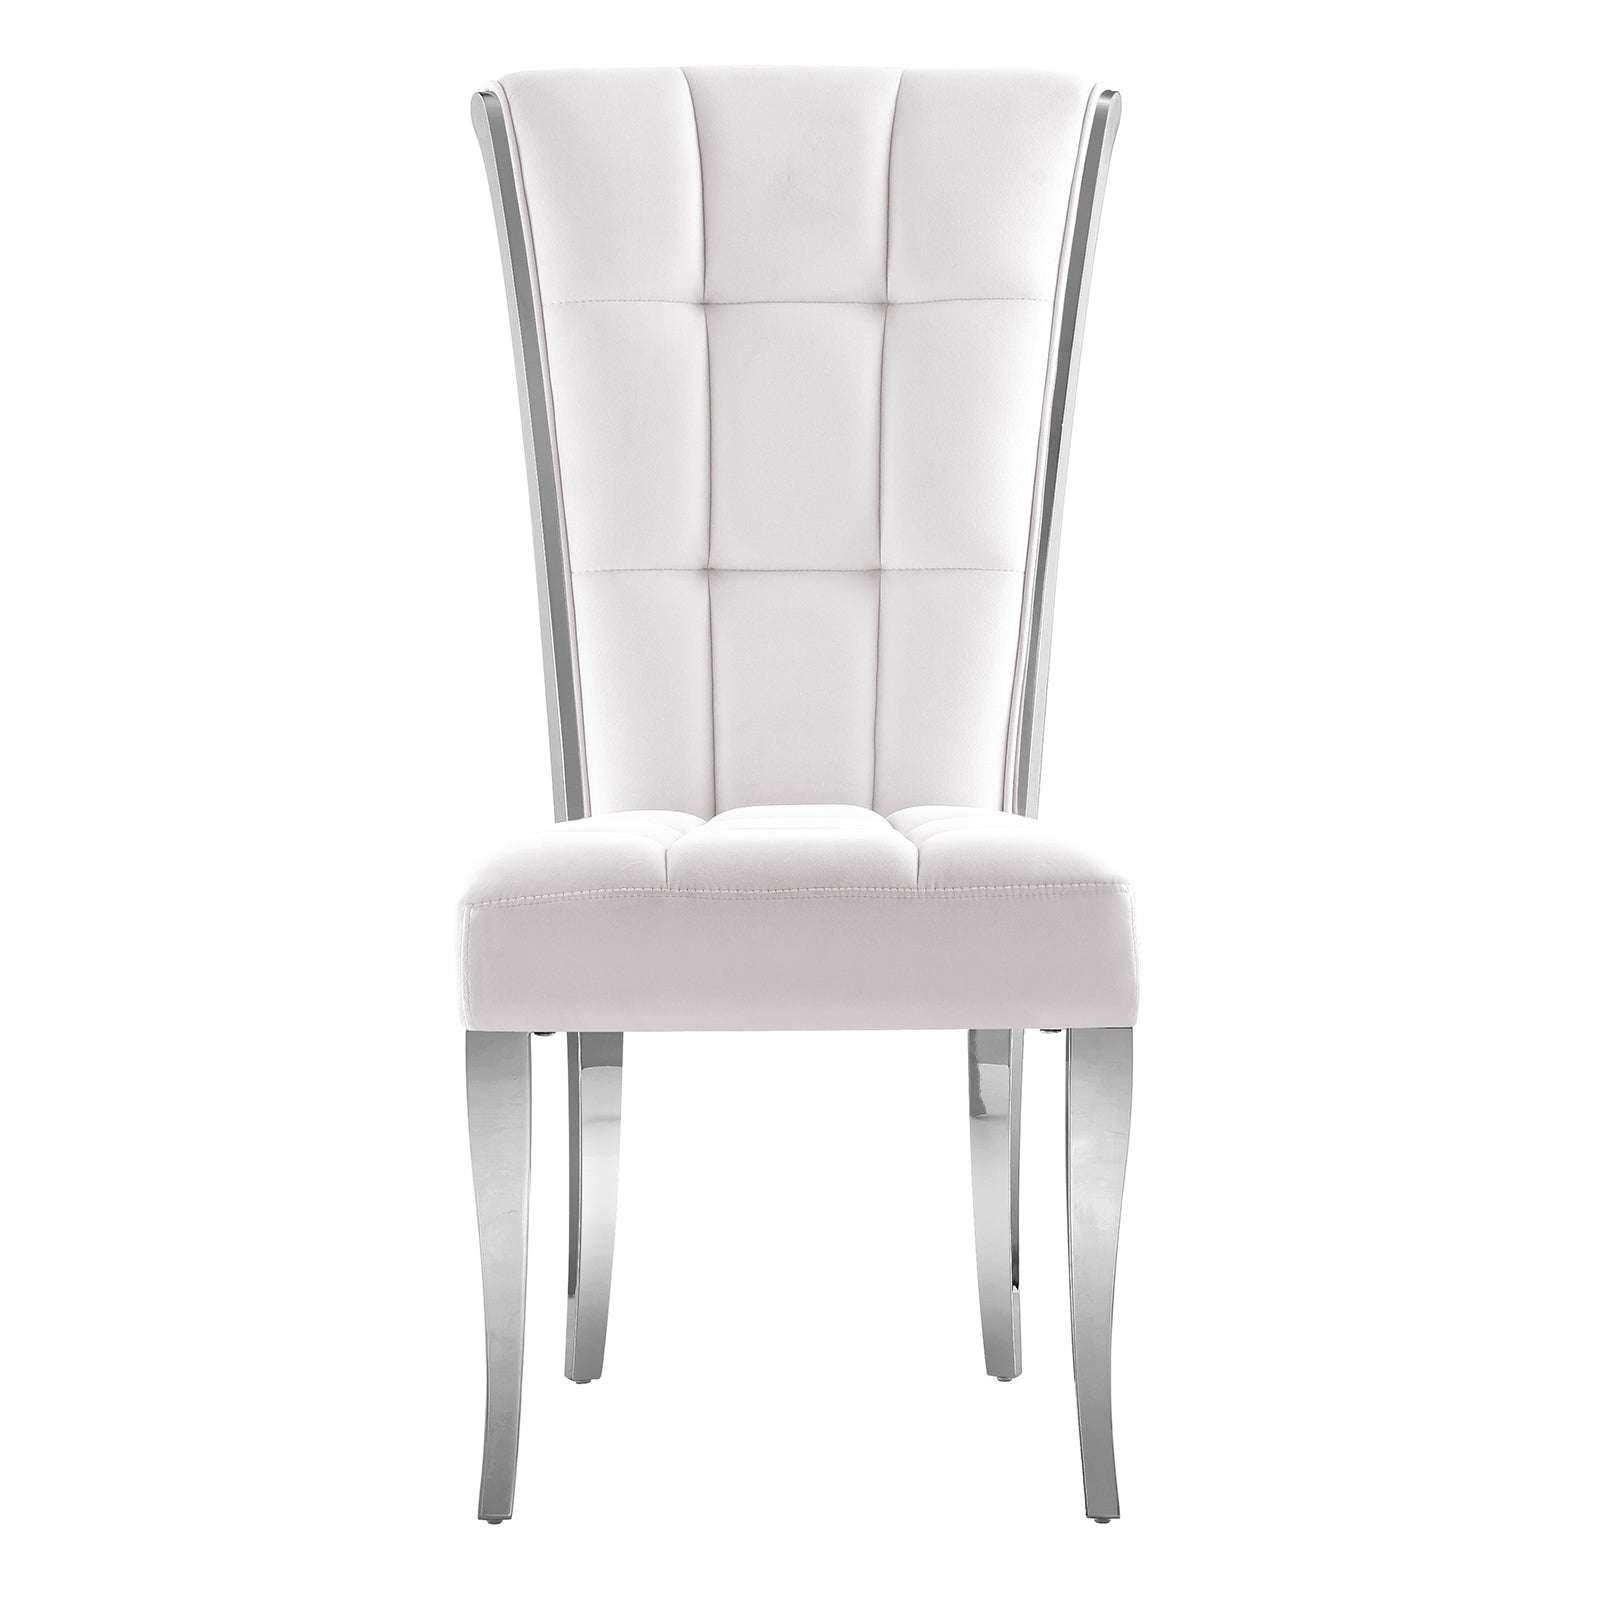 615-Set | AUZ White and Silver Dining room Sets for 6